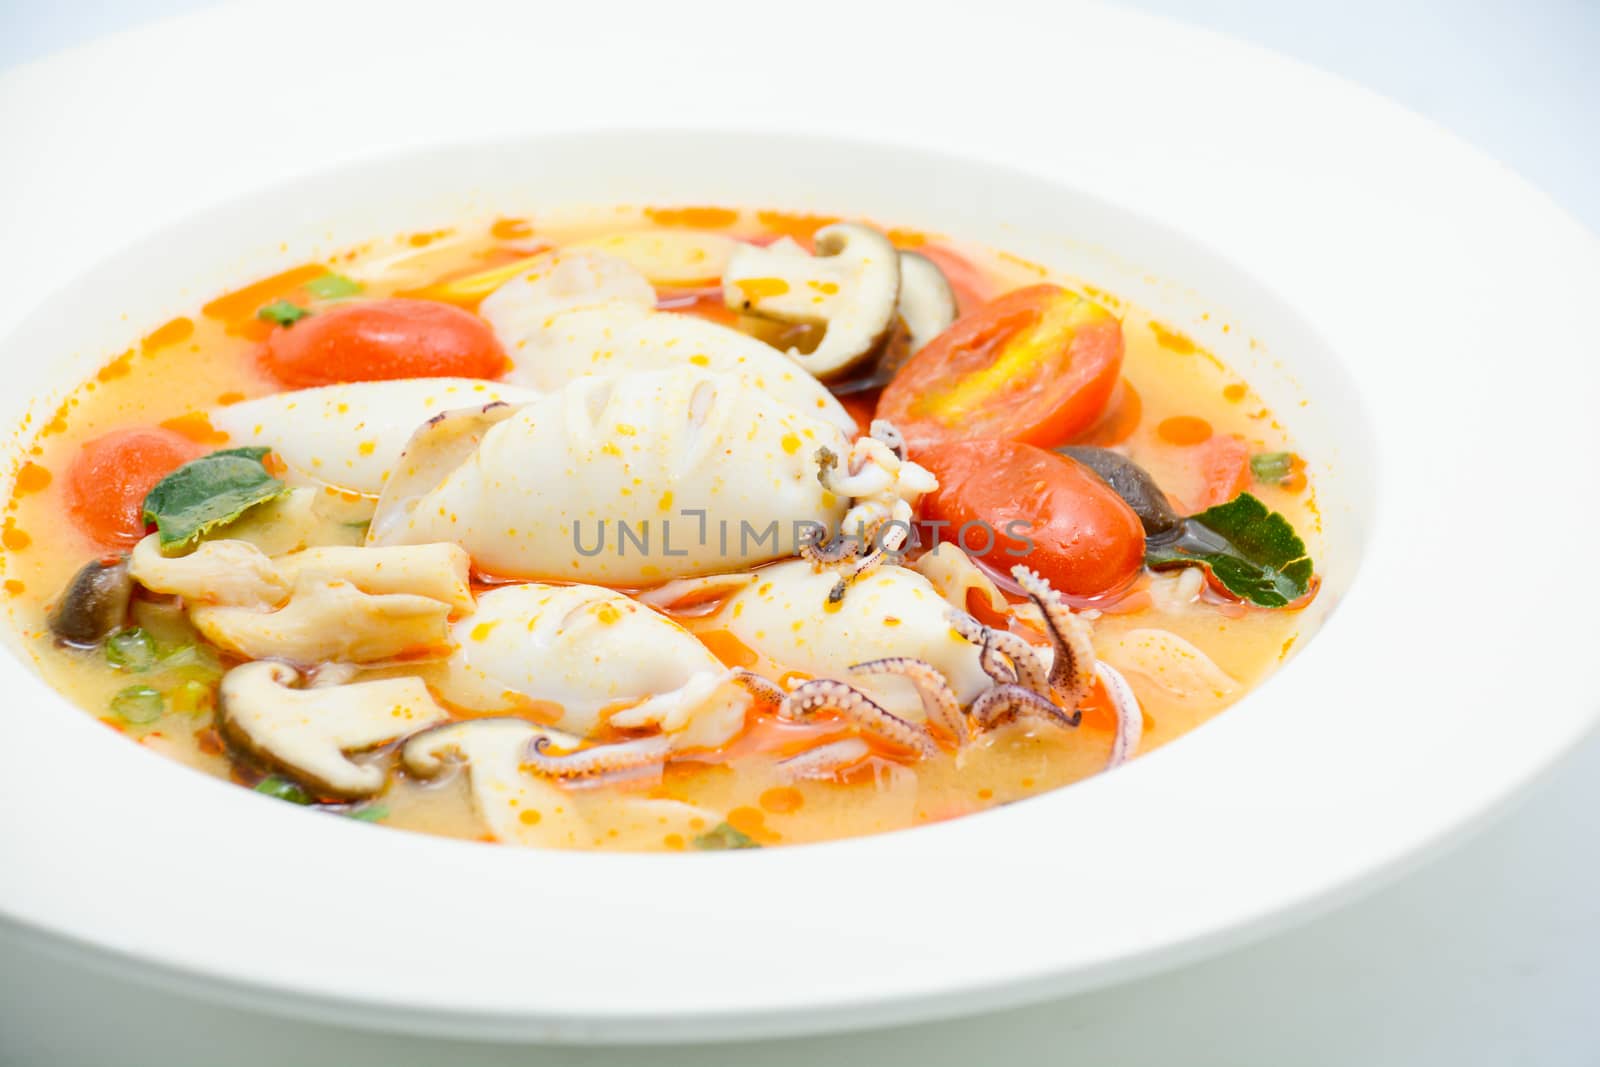 Squids and lemon grass spicy soup with mushrooms, tomatoes and h by yuiyuize